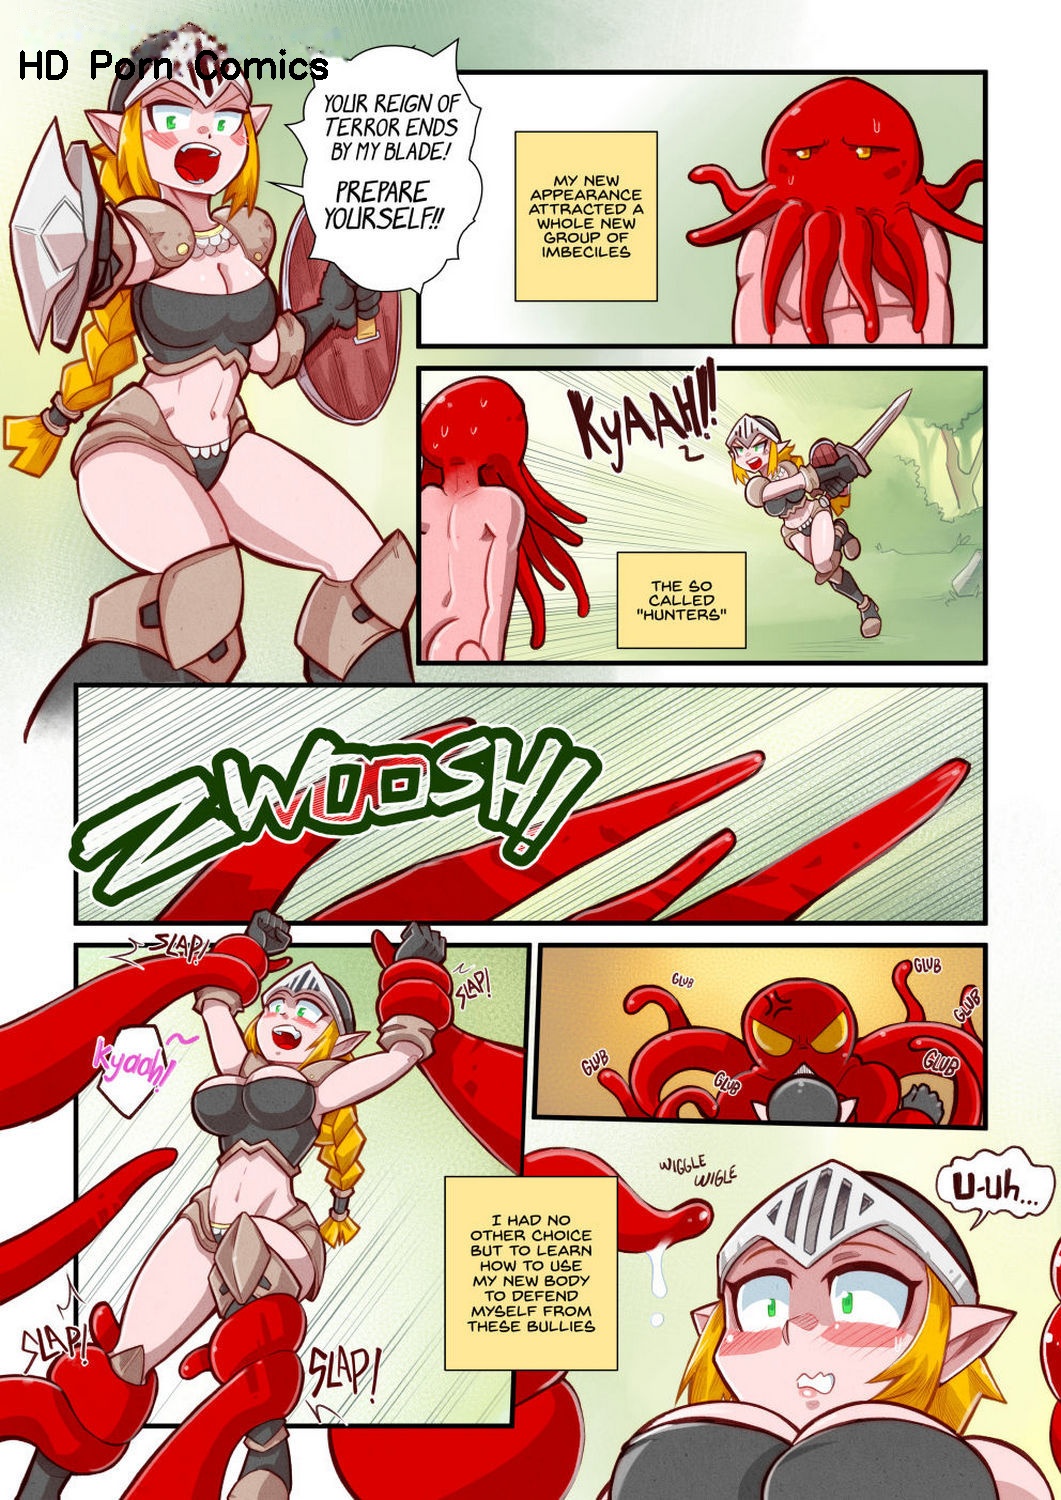 Tentacle Sex Monsters - Life As A Tentacle Monster In Another World comic porn - HD Porn Comics